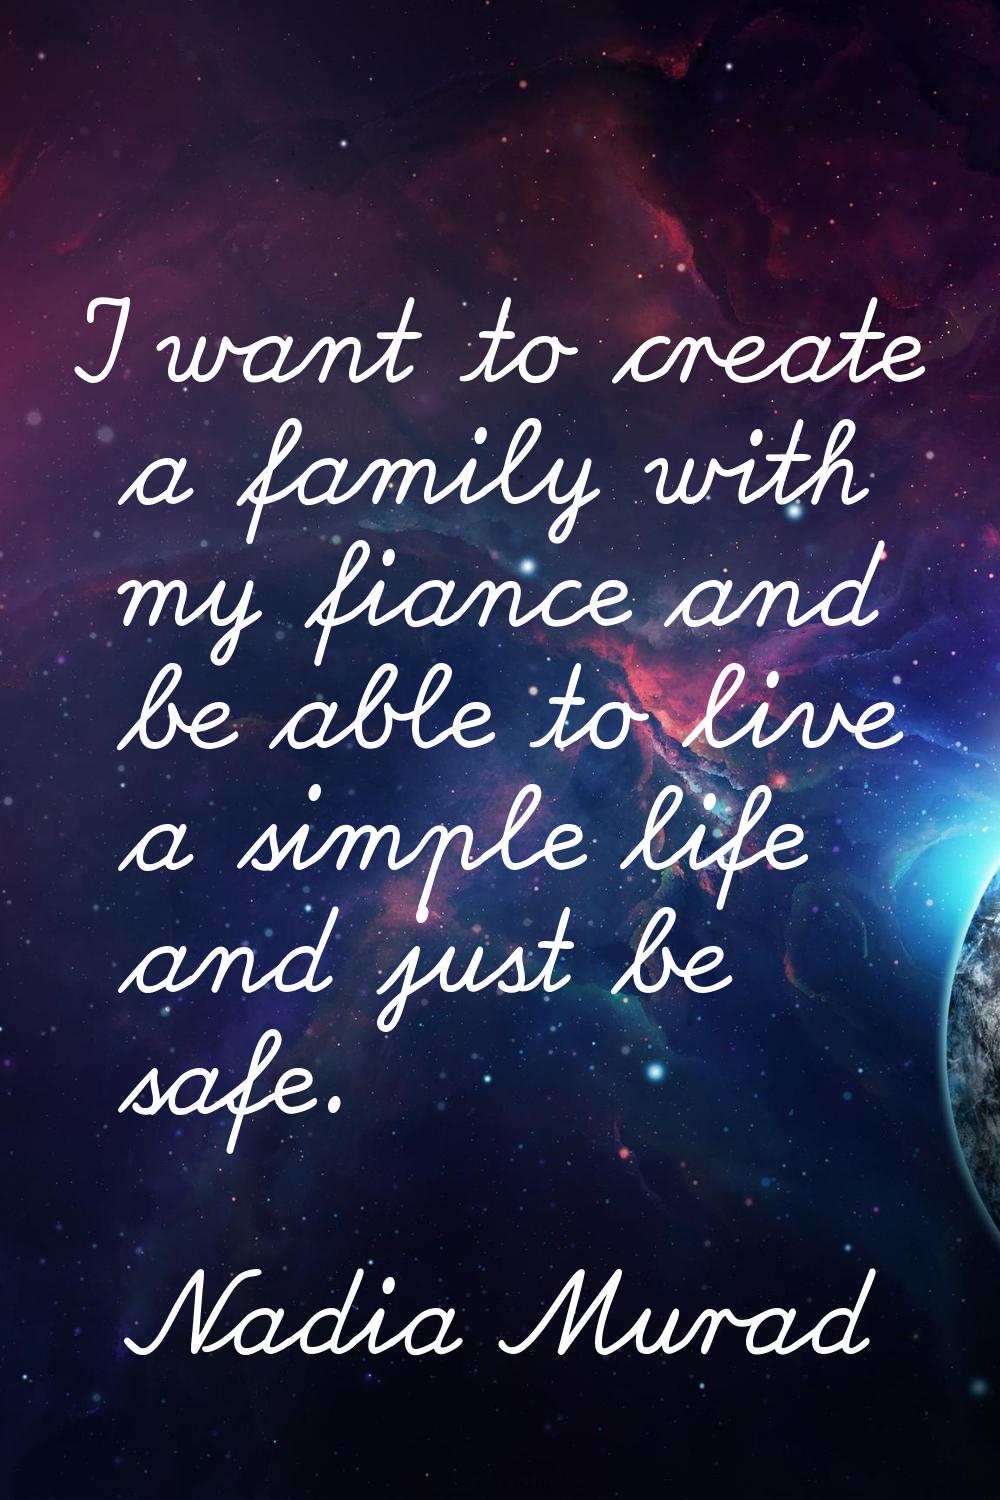 I want to create a family with my fiance and be able to live a simple life and just be safe.